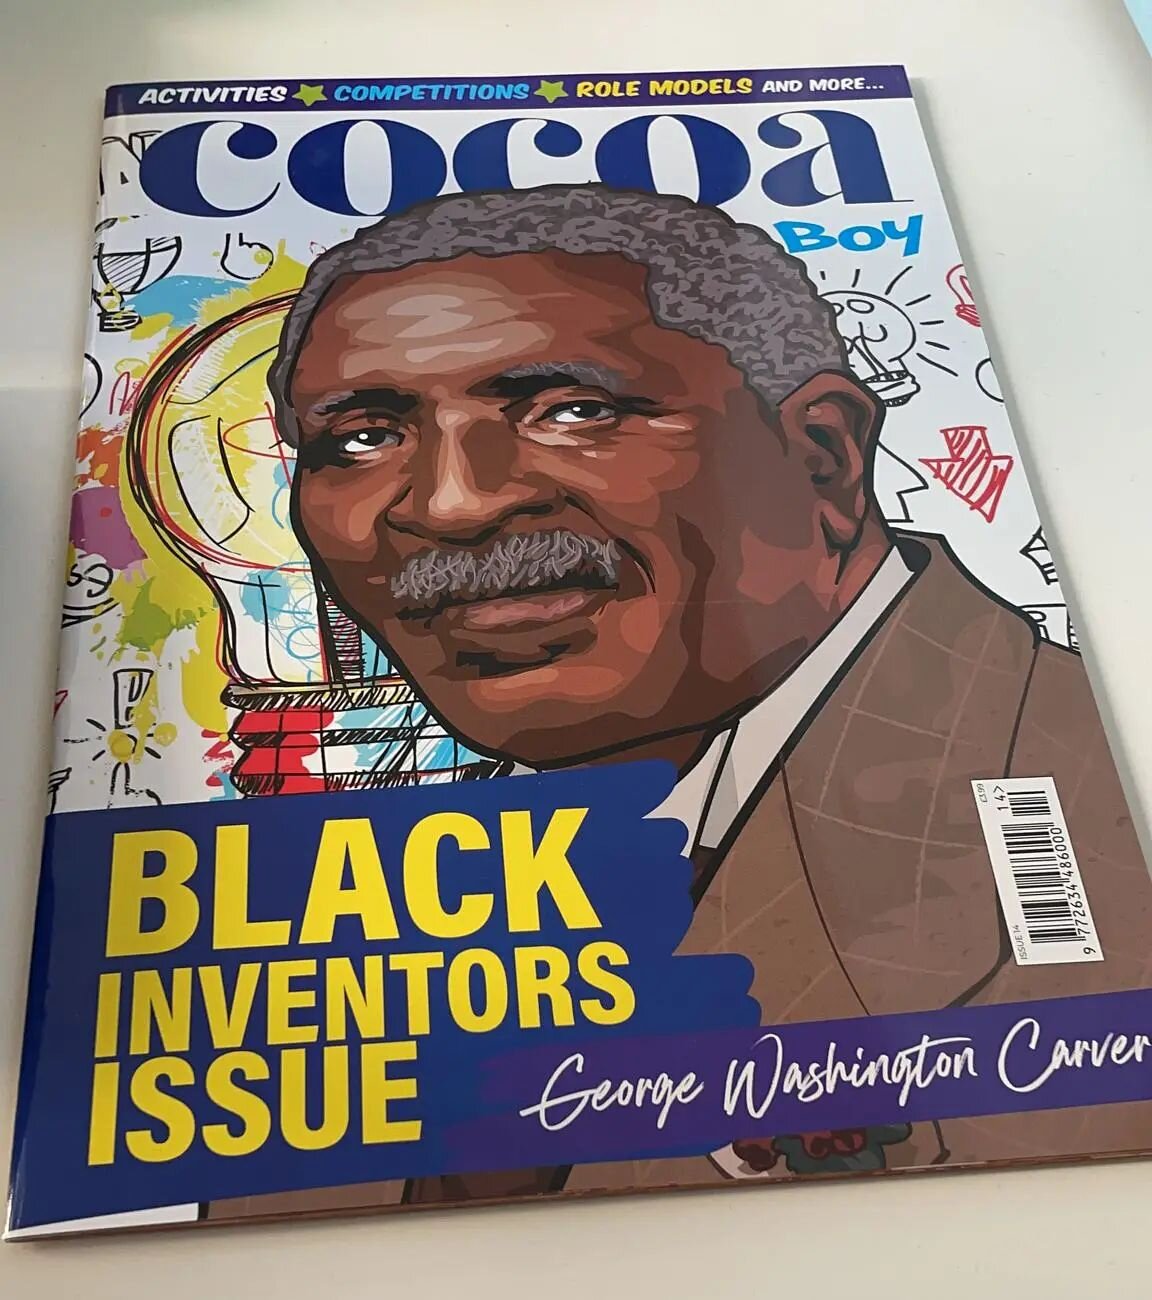 So we moved to The Gambia , West Africa.. BUT we still need our @cocoagirlmag  and @cocoaboymag fix❗❗❗❗
Well, I just ordered them to Grandma in Sweden who will be our most awesome cross continental delivery  person!!! 😁😁😁😁
We are so longing forwa